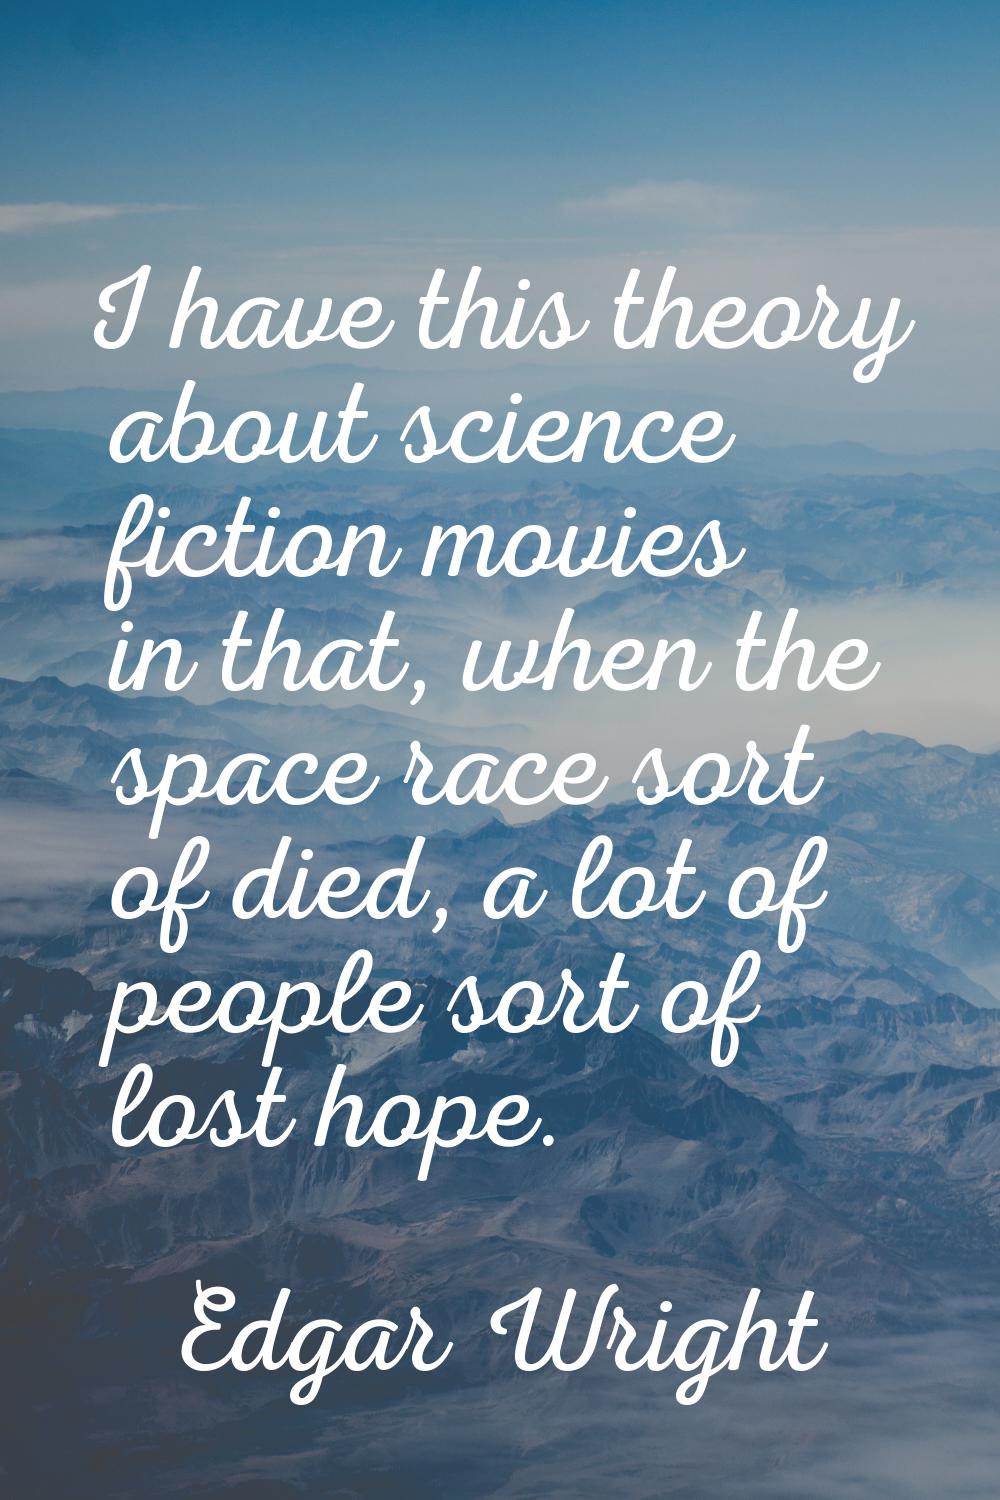 I have this theory about science fiction movies in that, when the space race sort of died, a lot of